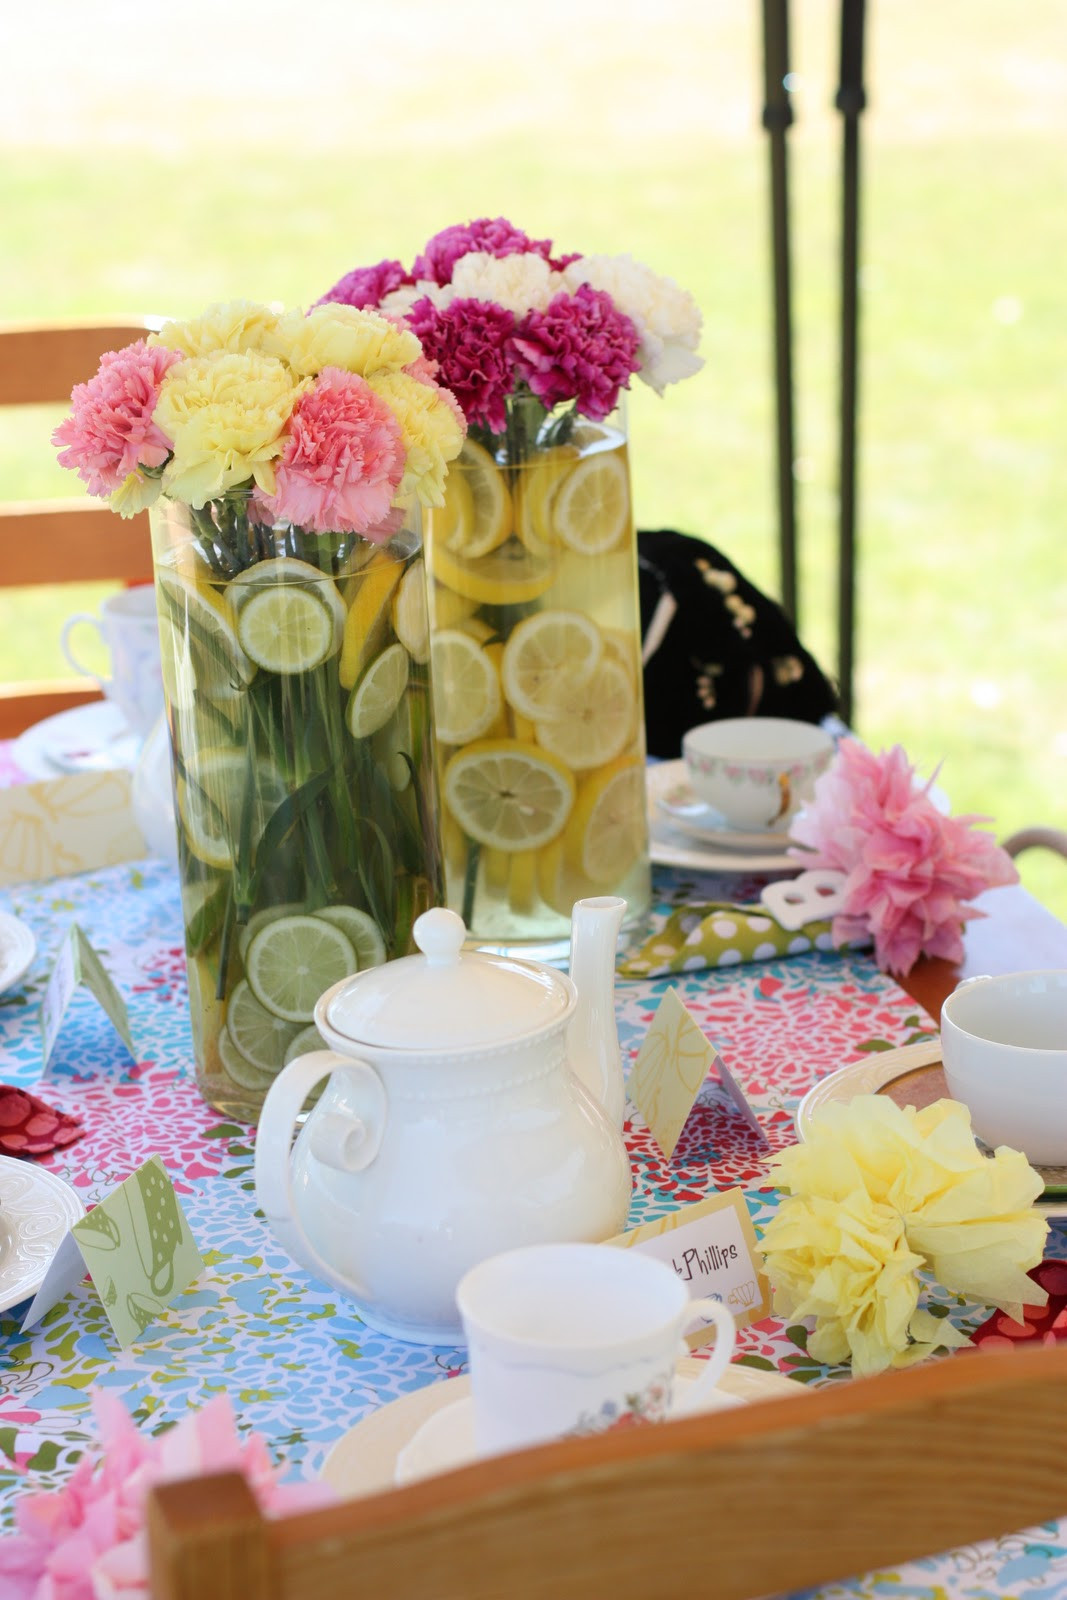 Tea Party Decorations Ideas
 Kara s Party Ideas Mother Daughter Tea Party 3rd Birthday